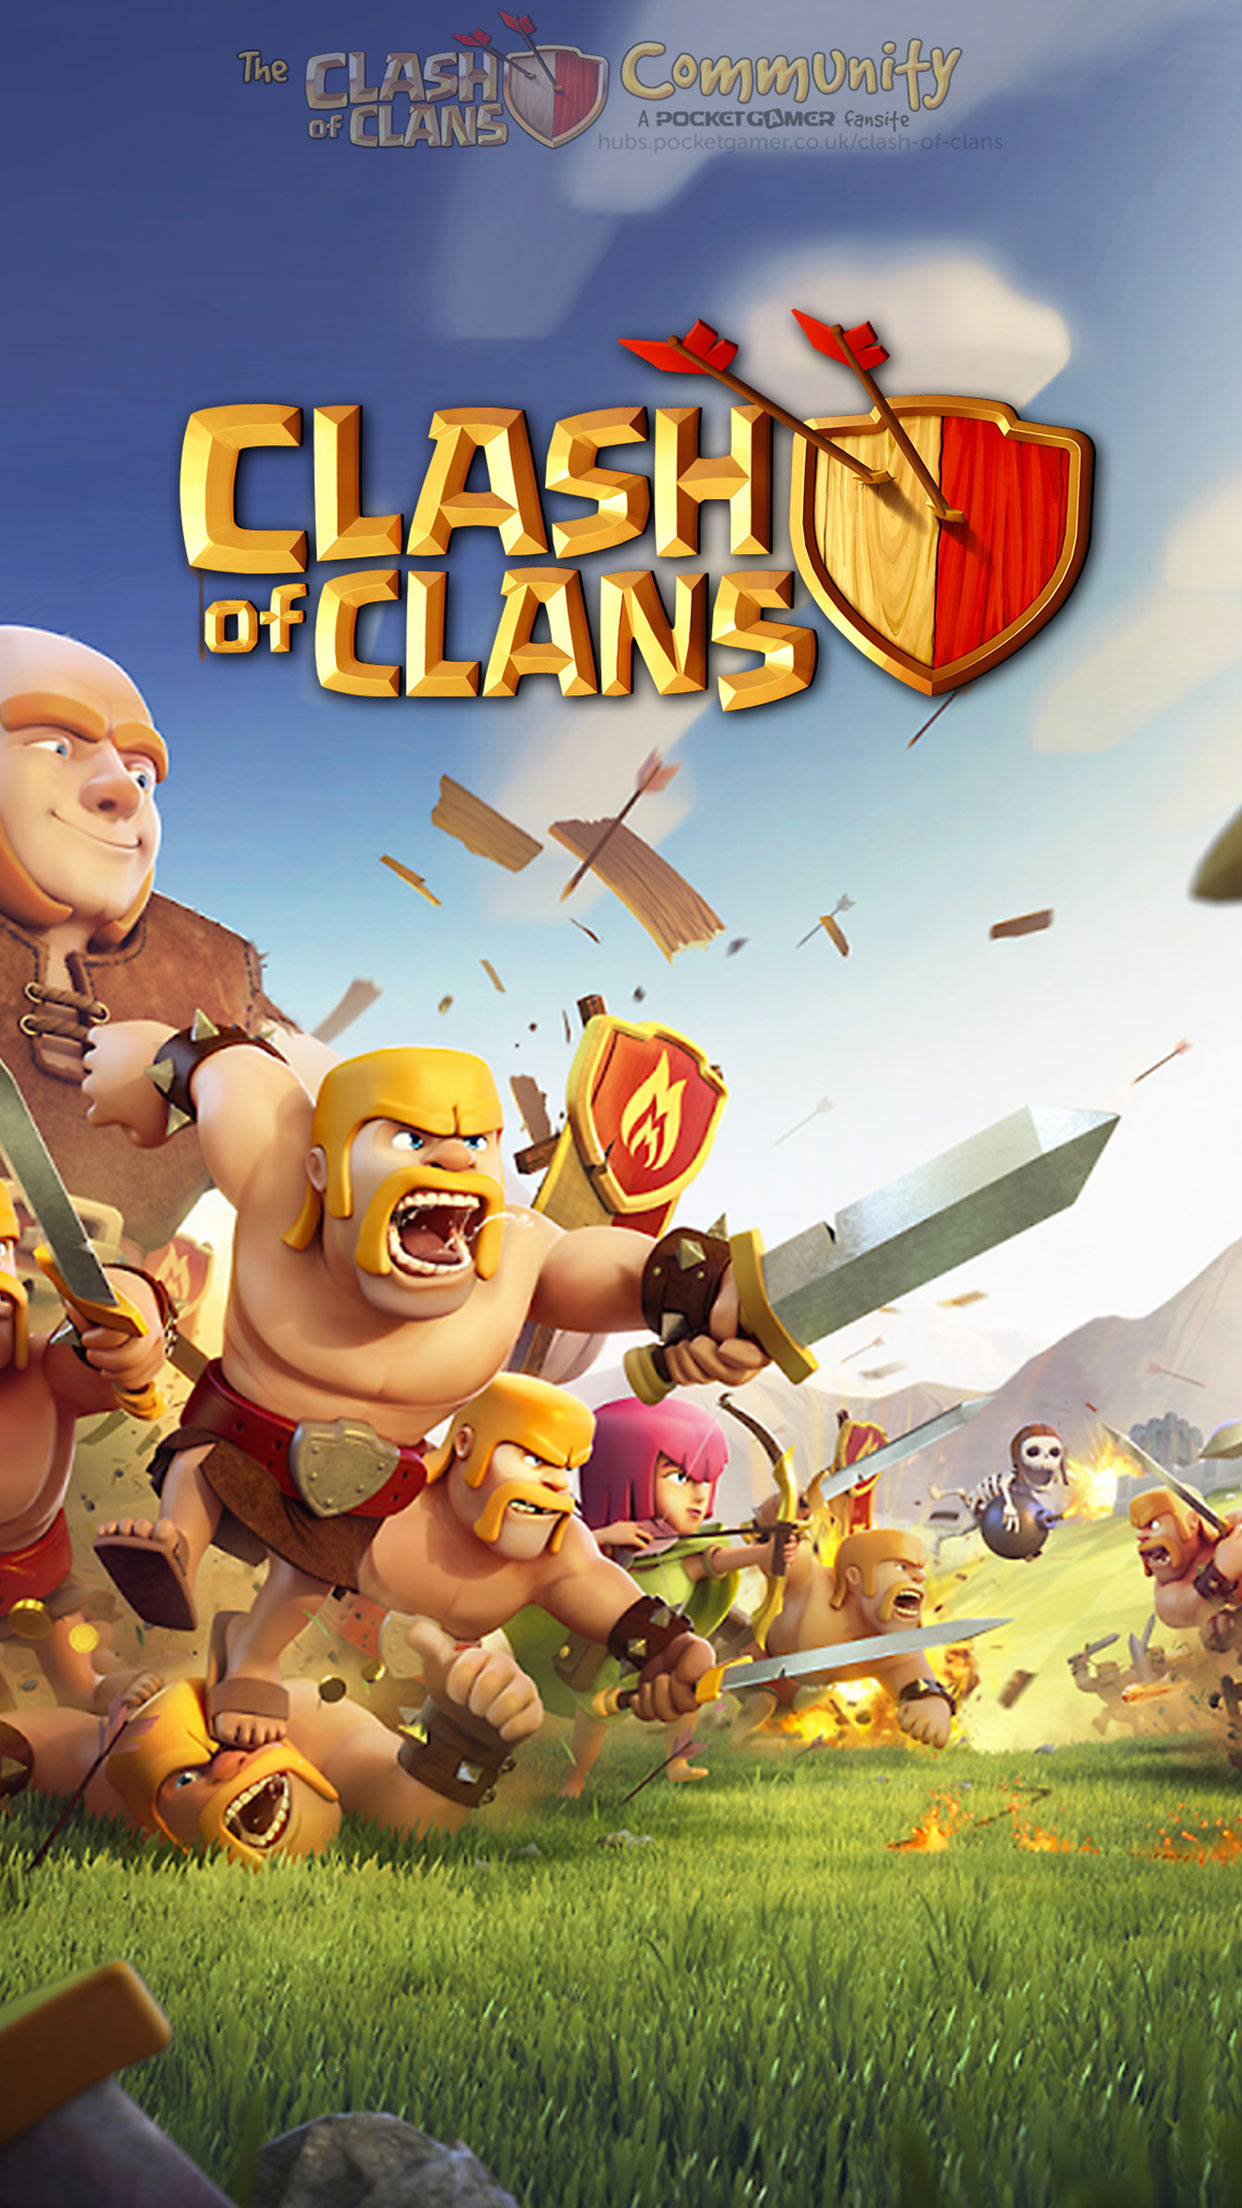 Clash of clans download